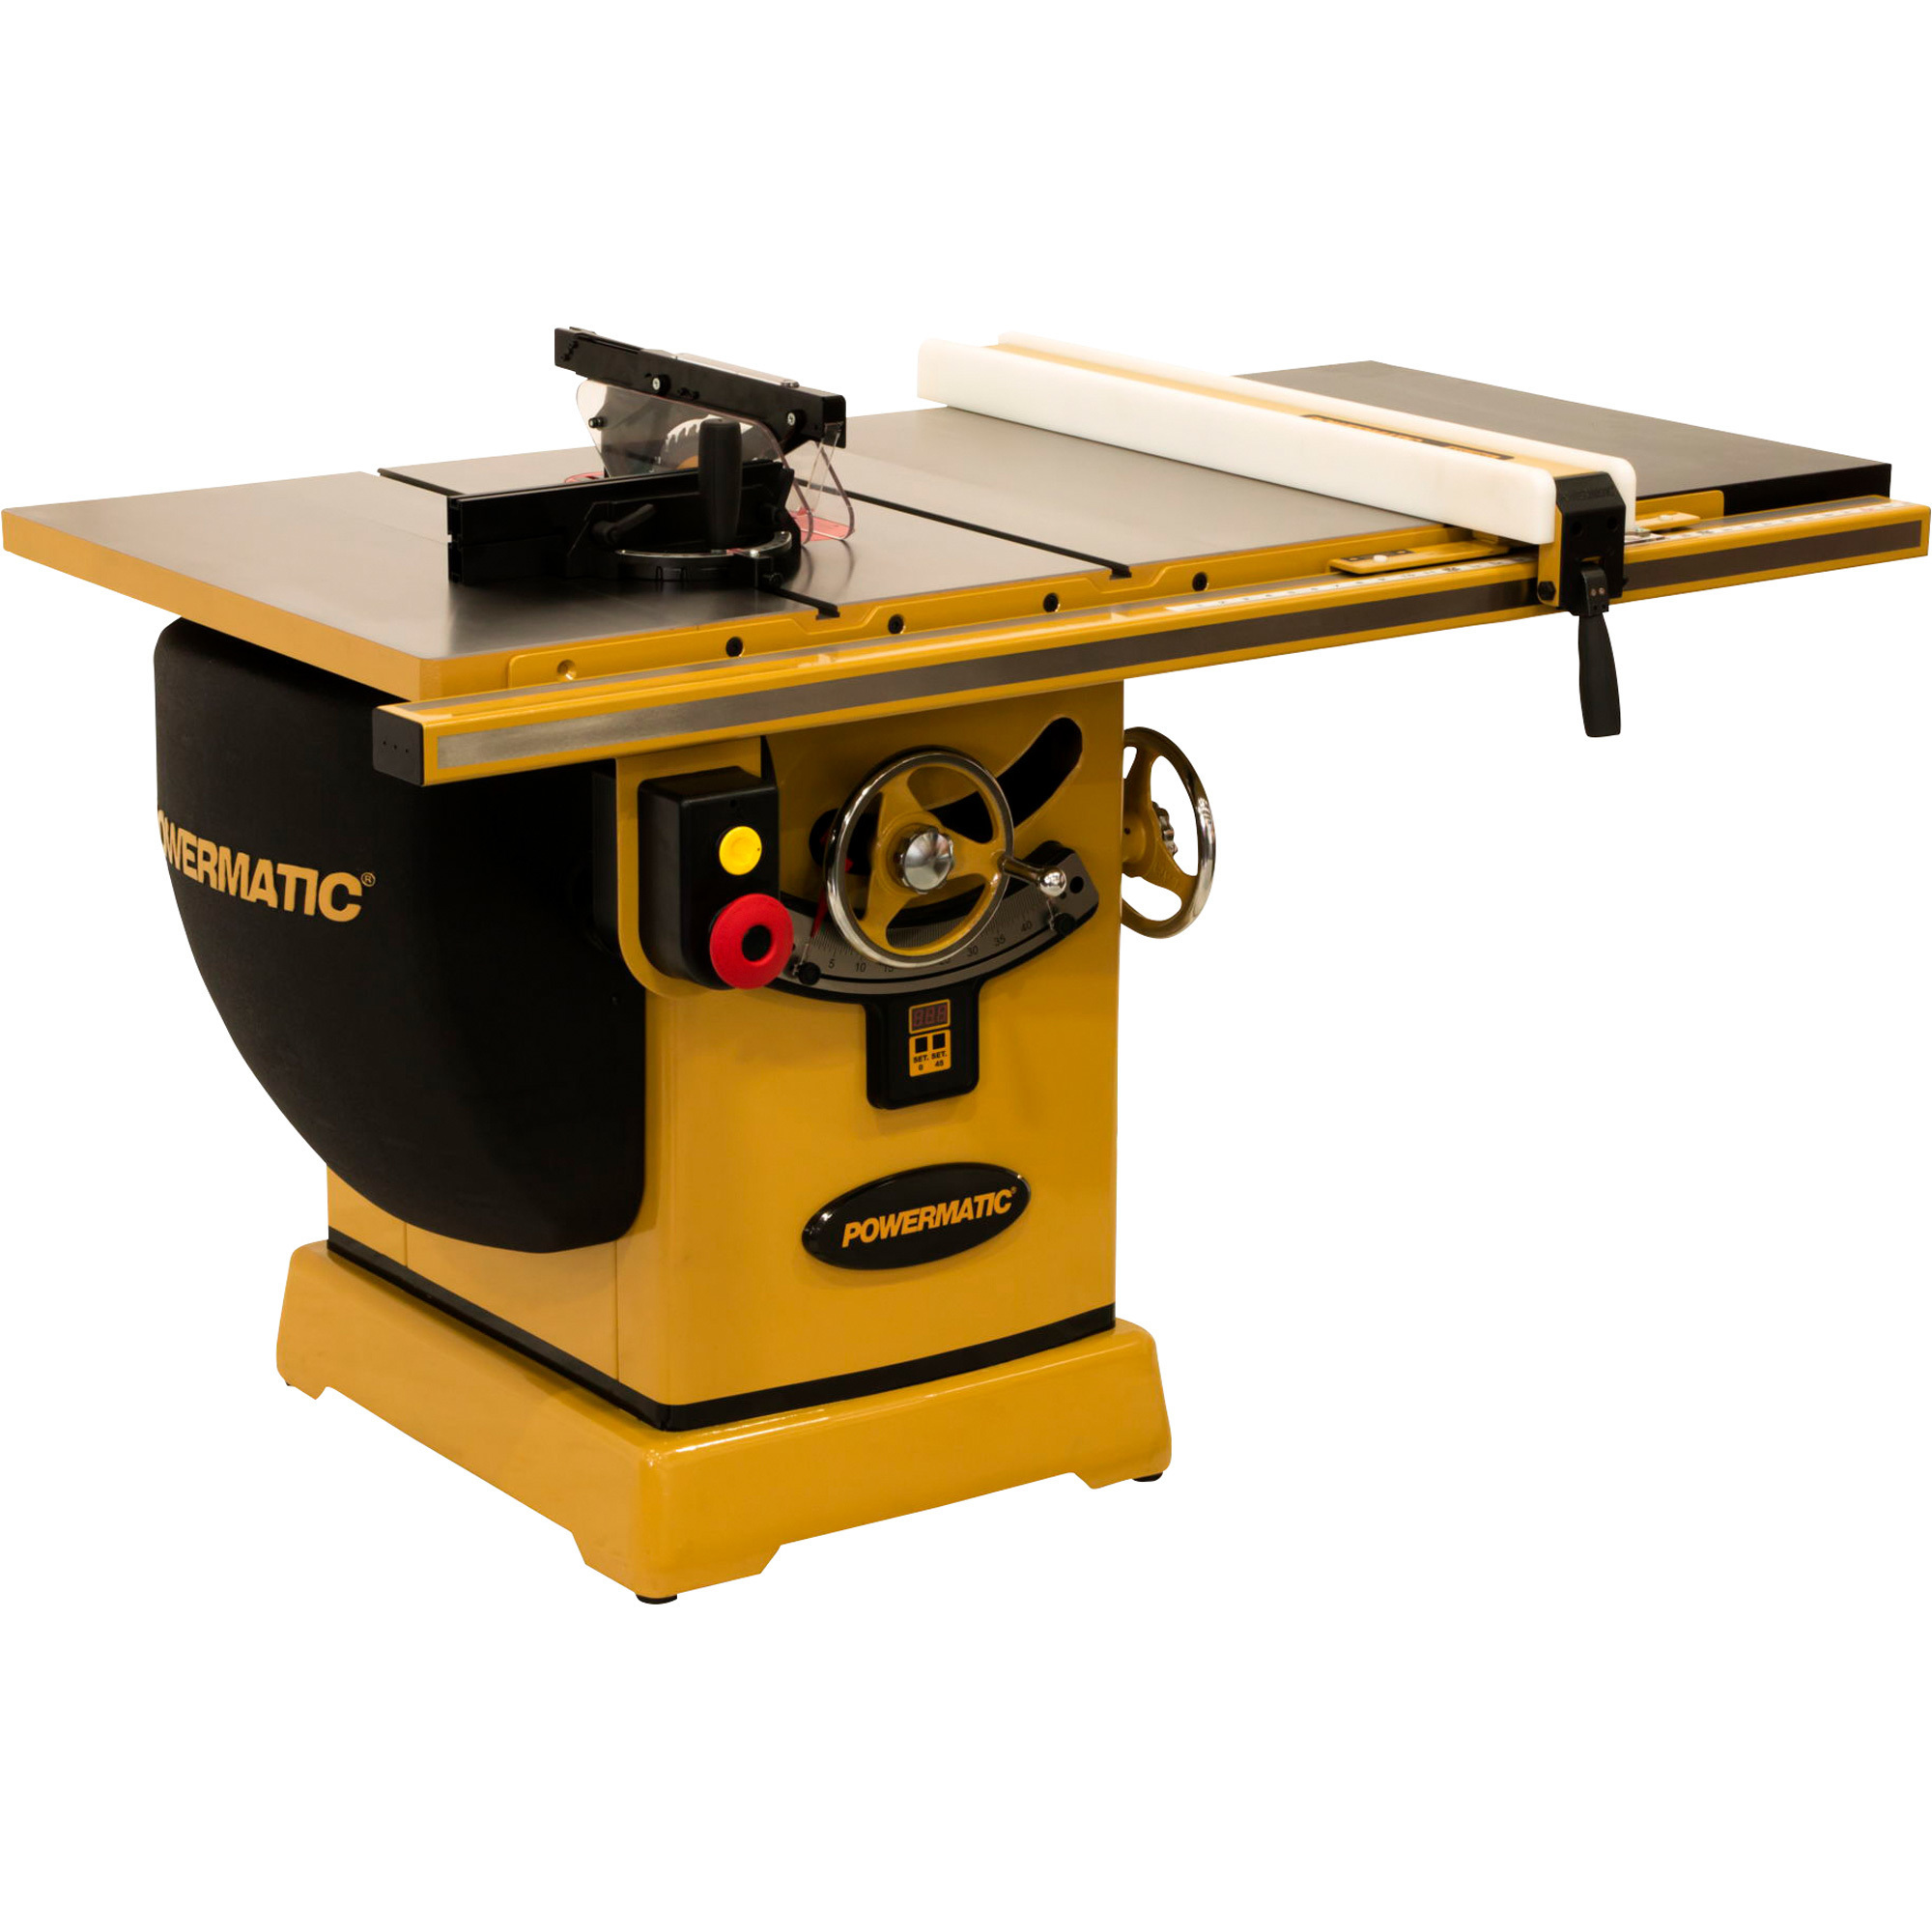 Powermatic 2000B Table Saw, 3 HP, 1 PH, 230V, 30Inch Rip with Accu-Fence